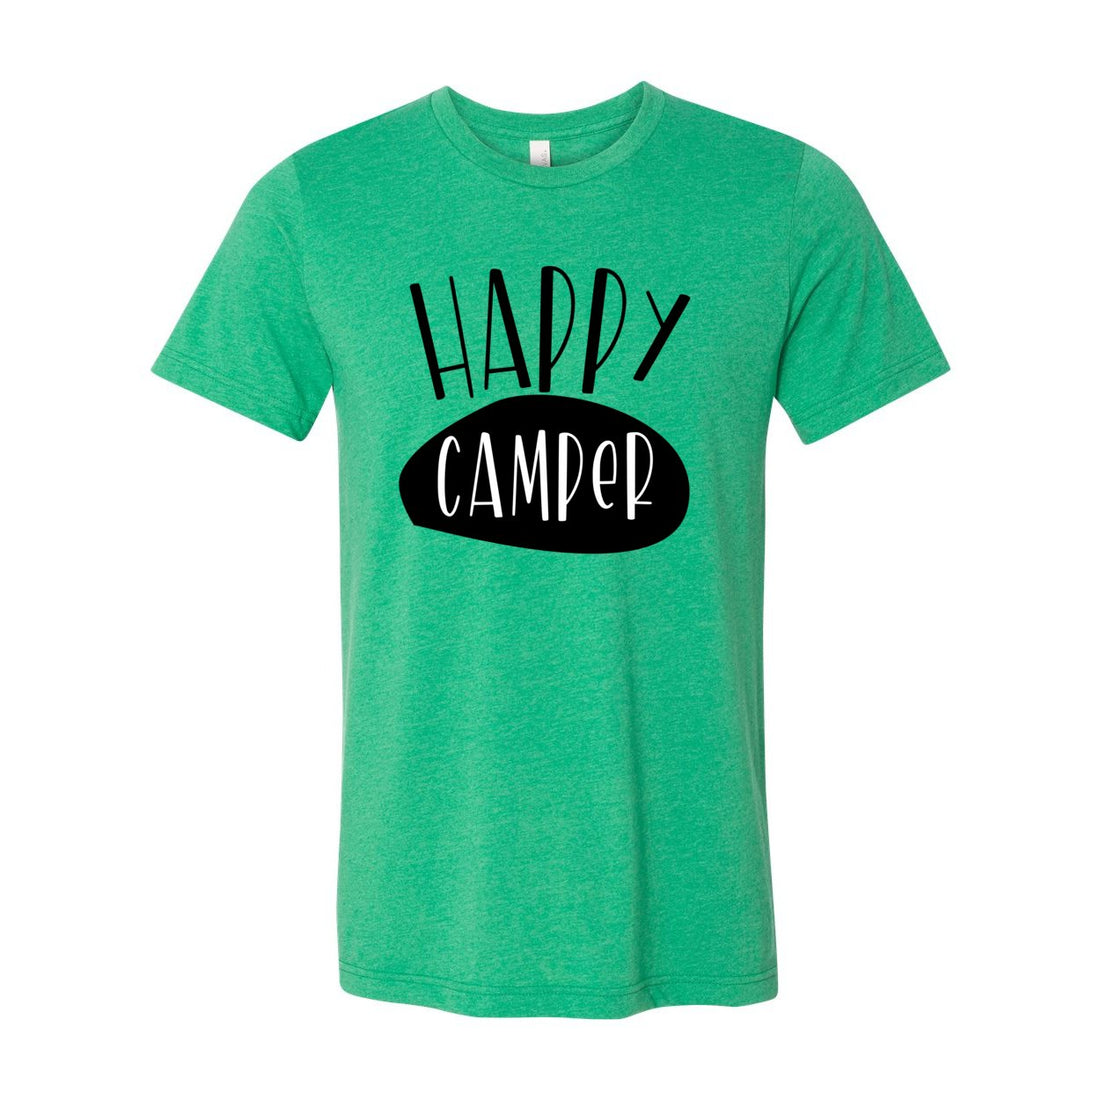 Happy Camper Sleeve Jersey Tee - T-Shirts - Positively Sassy - Happy Camper Sleeve Jersey Tee